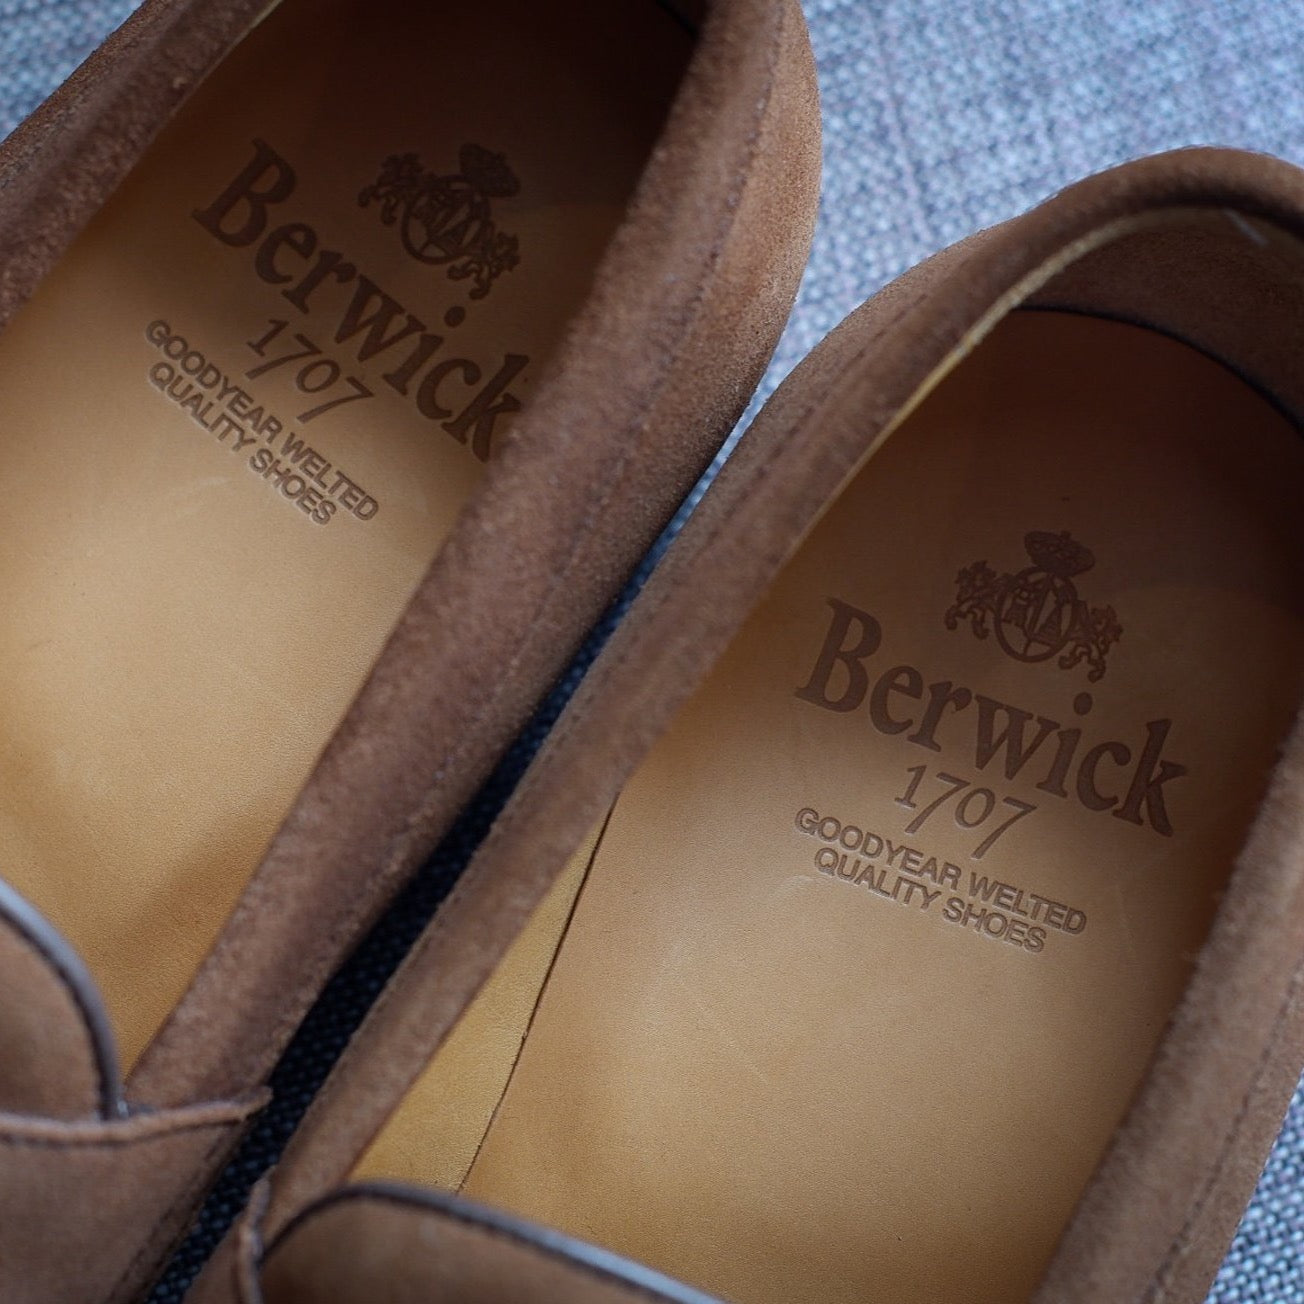 Berwick 1707 Penny Loafer in Snuff Suede and Dainite Soles